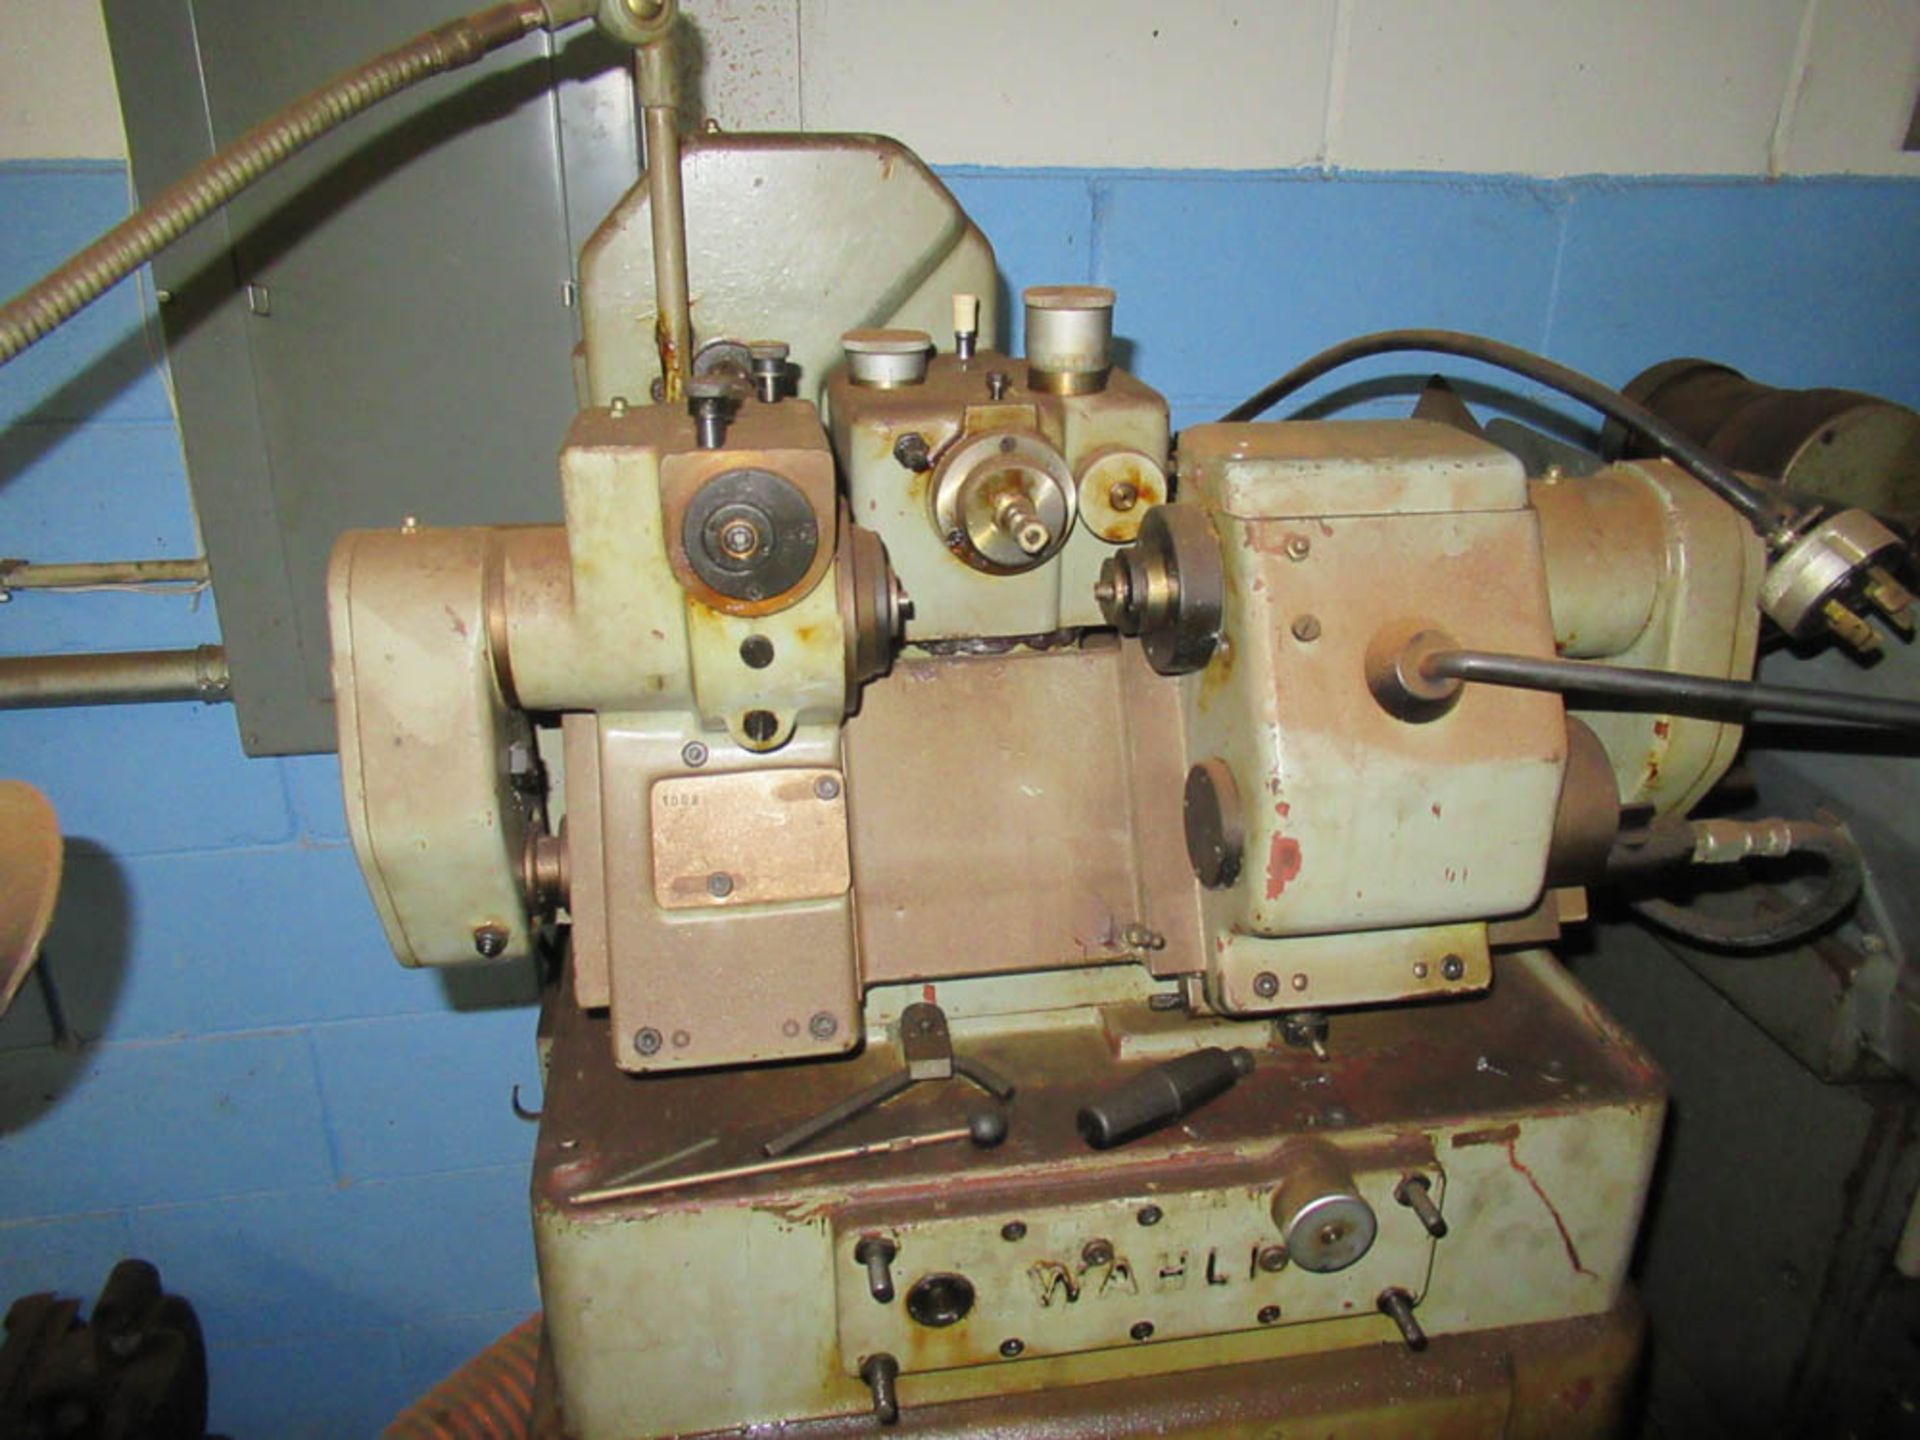 WAHLI MDL. 90 GEAR HOBBER, S/N: 1008 [LOCATED IN COPIAGUE, NY] - Image 2 of 3